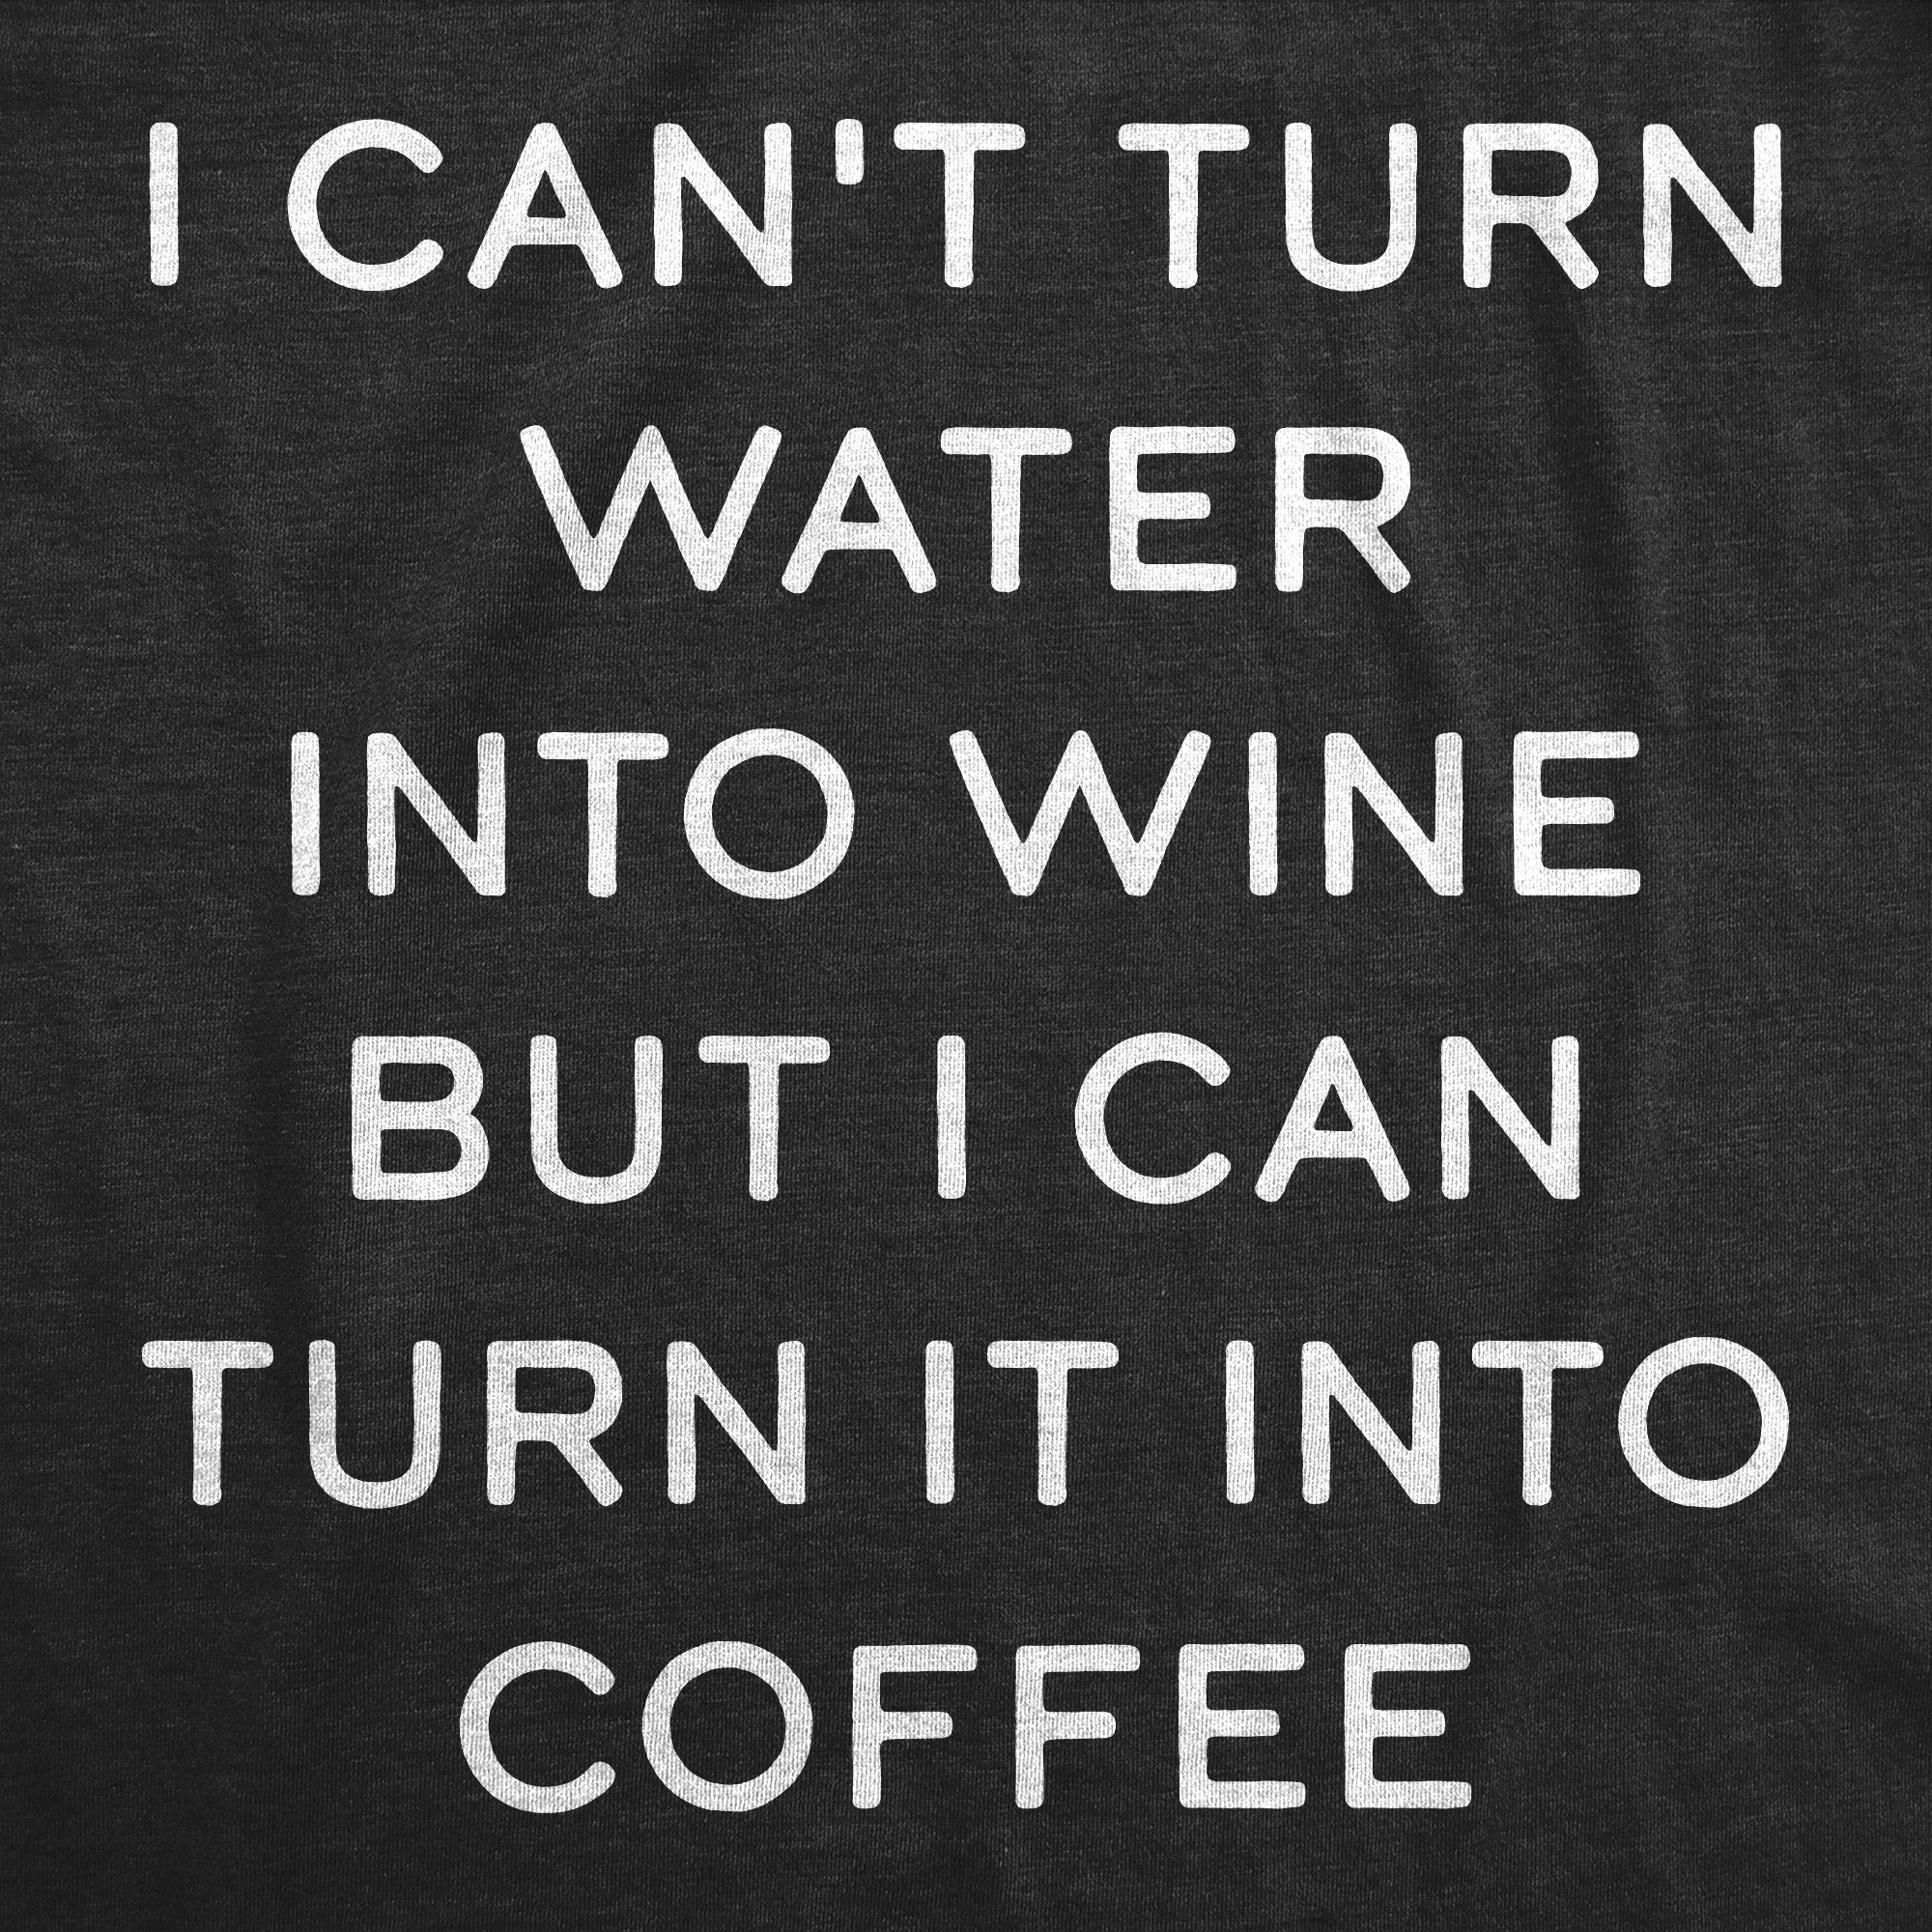 Funny Heather Black - WATER I Cant Turn Water Into Wine But I Can Turn It Into Coffee Womens T Shirt Nerdy Coffee sarcastic Tee